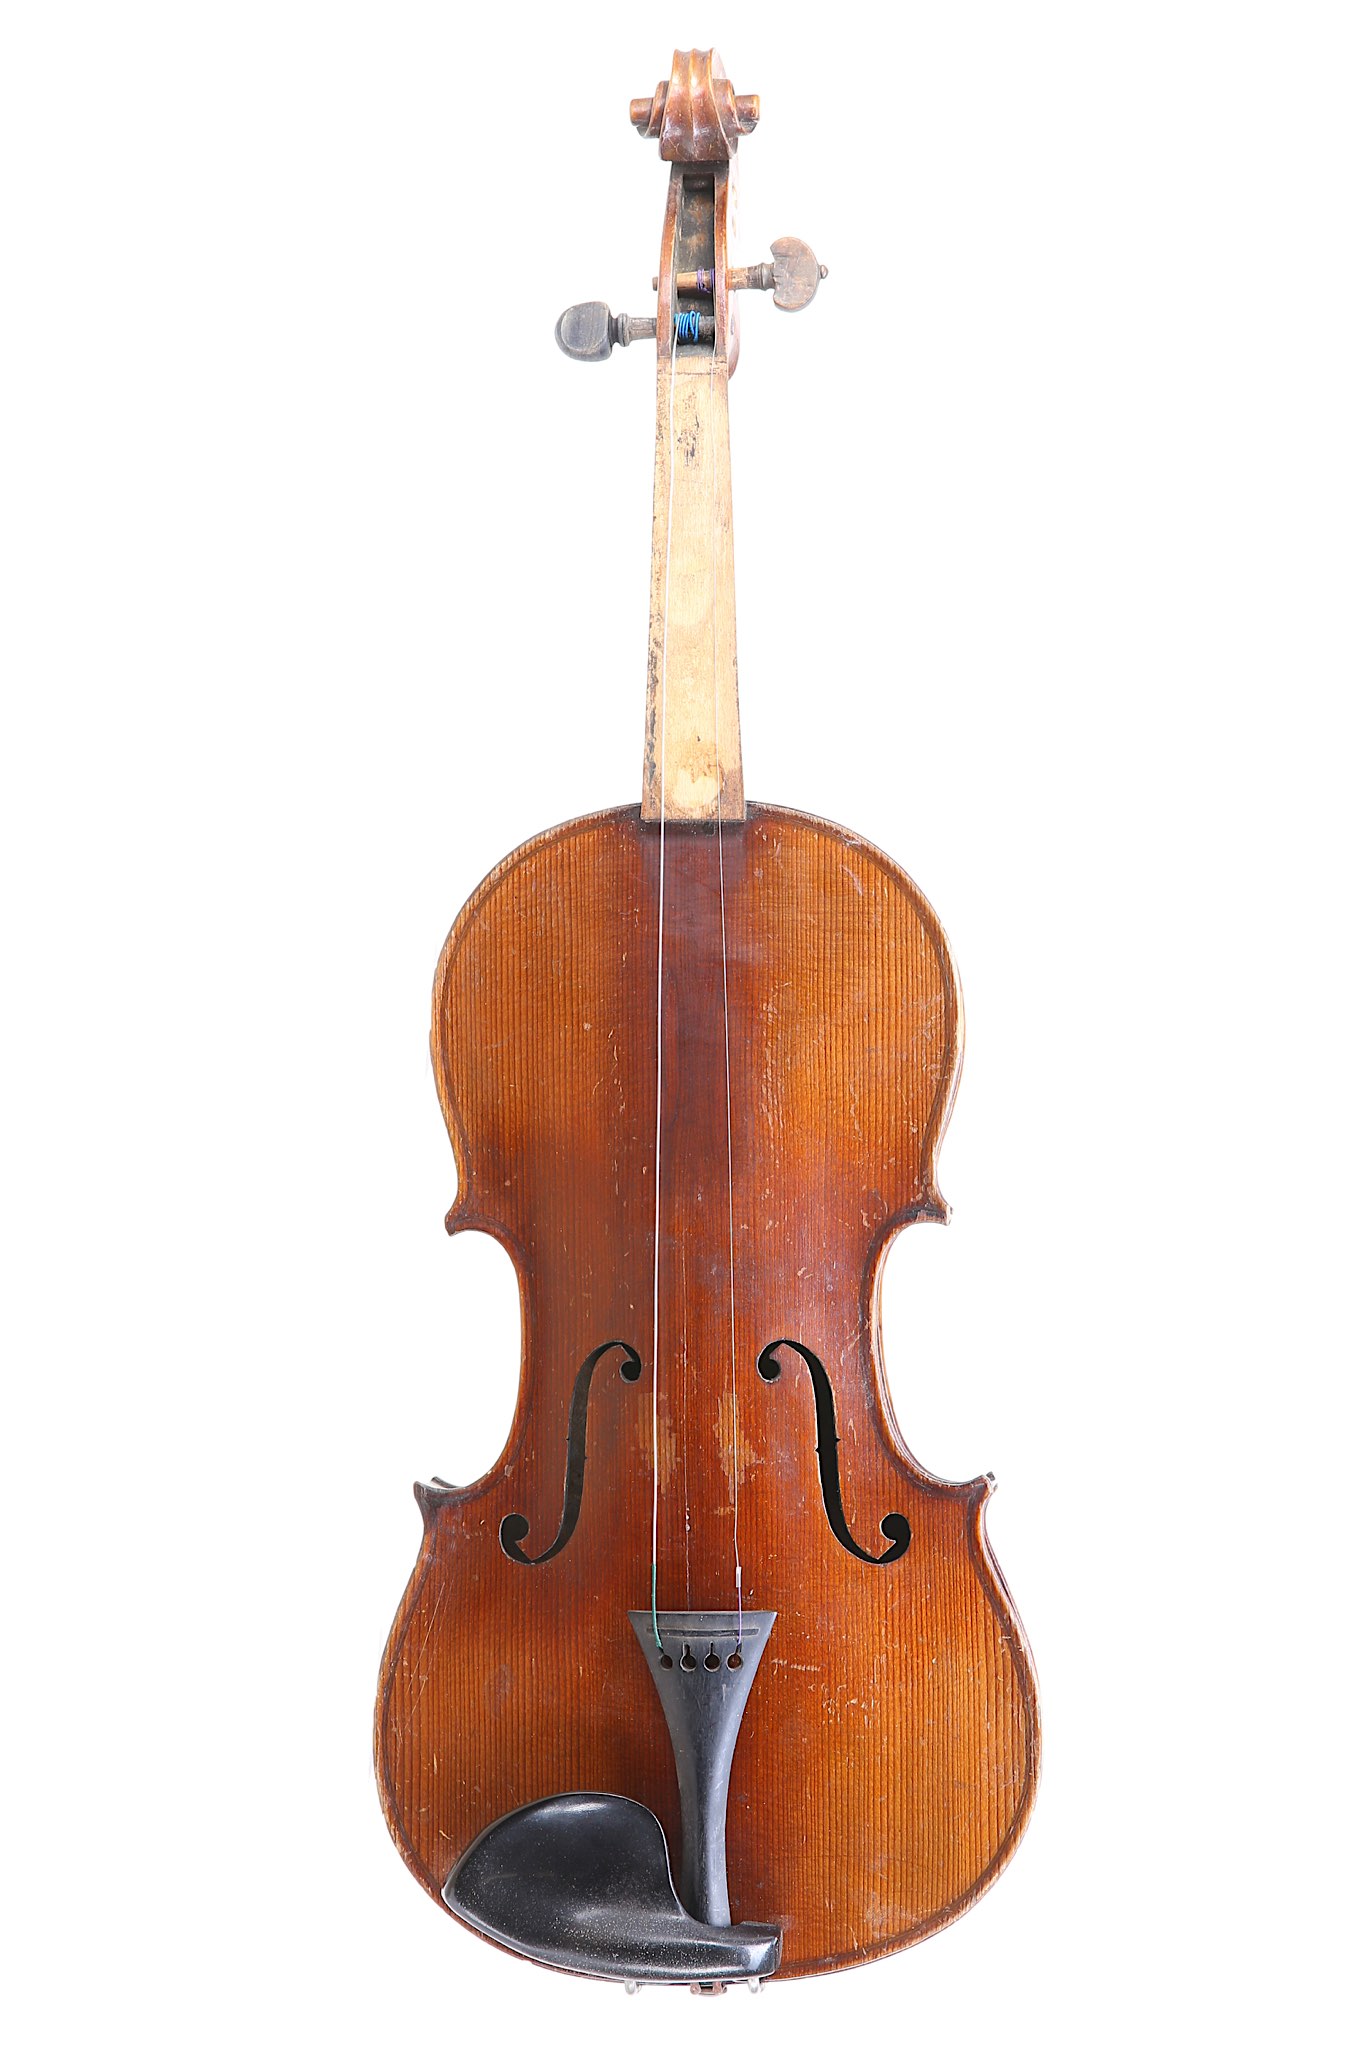 German violin. Early 20th century. No labelled. Two piece back ,medium figure flame maple wood,